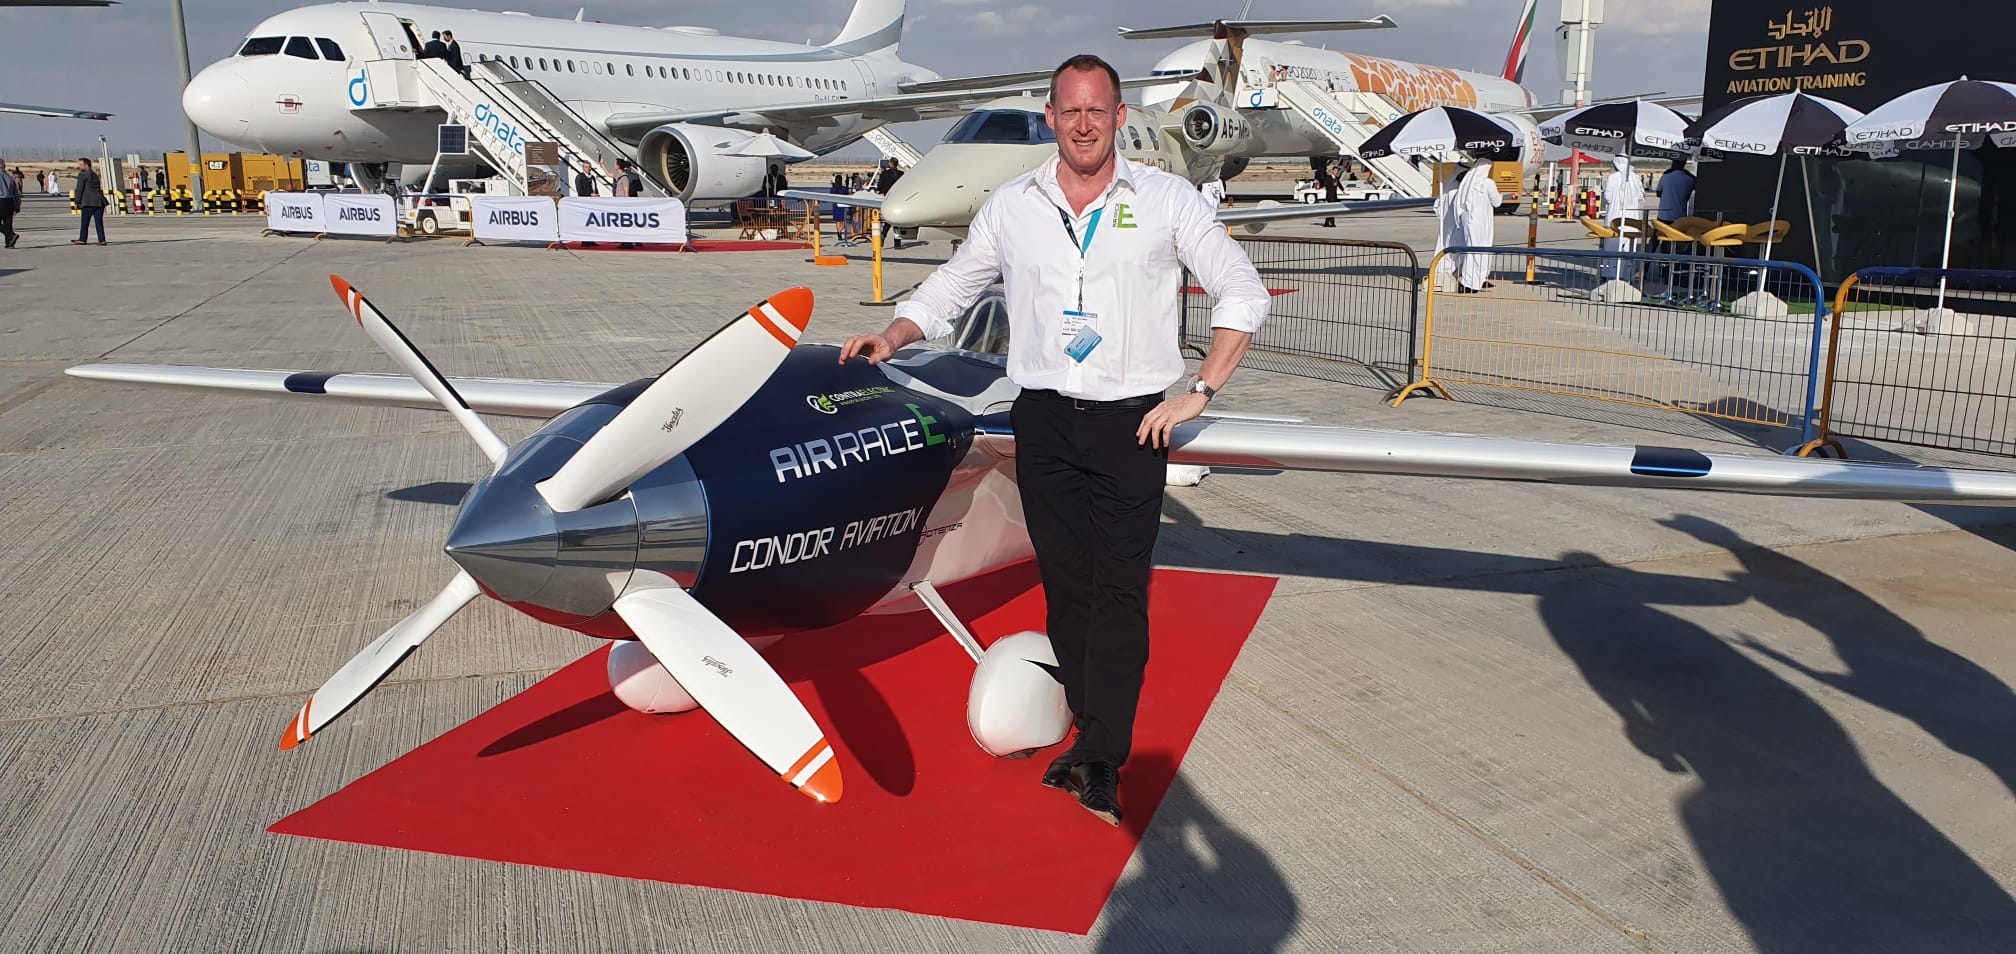 World’s first electric race plane unveiled at Dubai Airshow